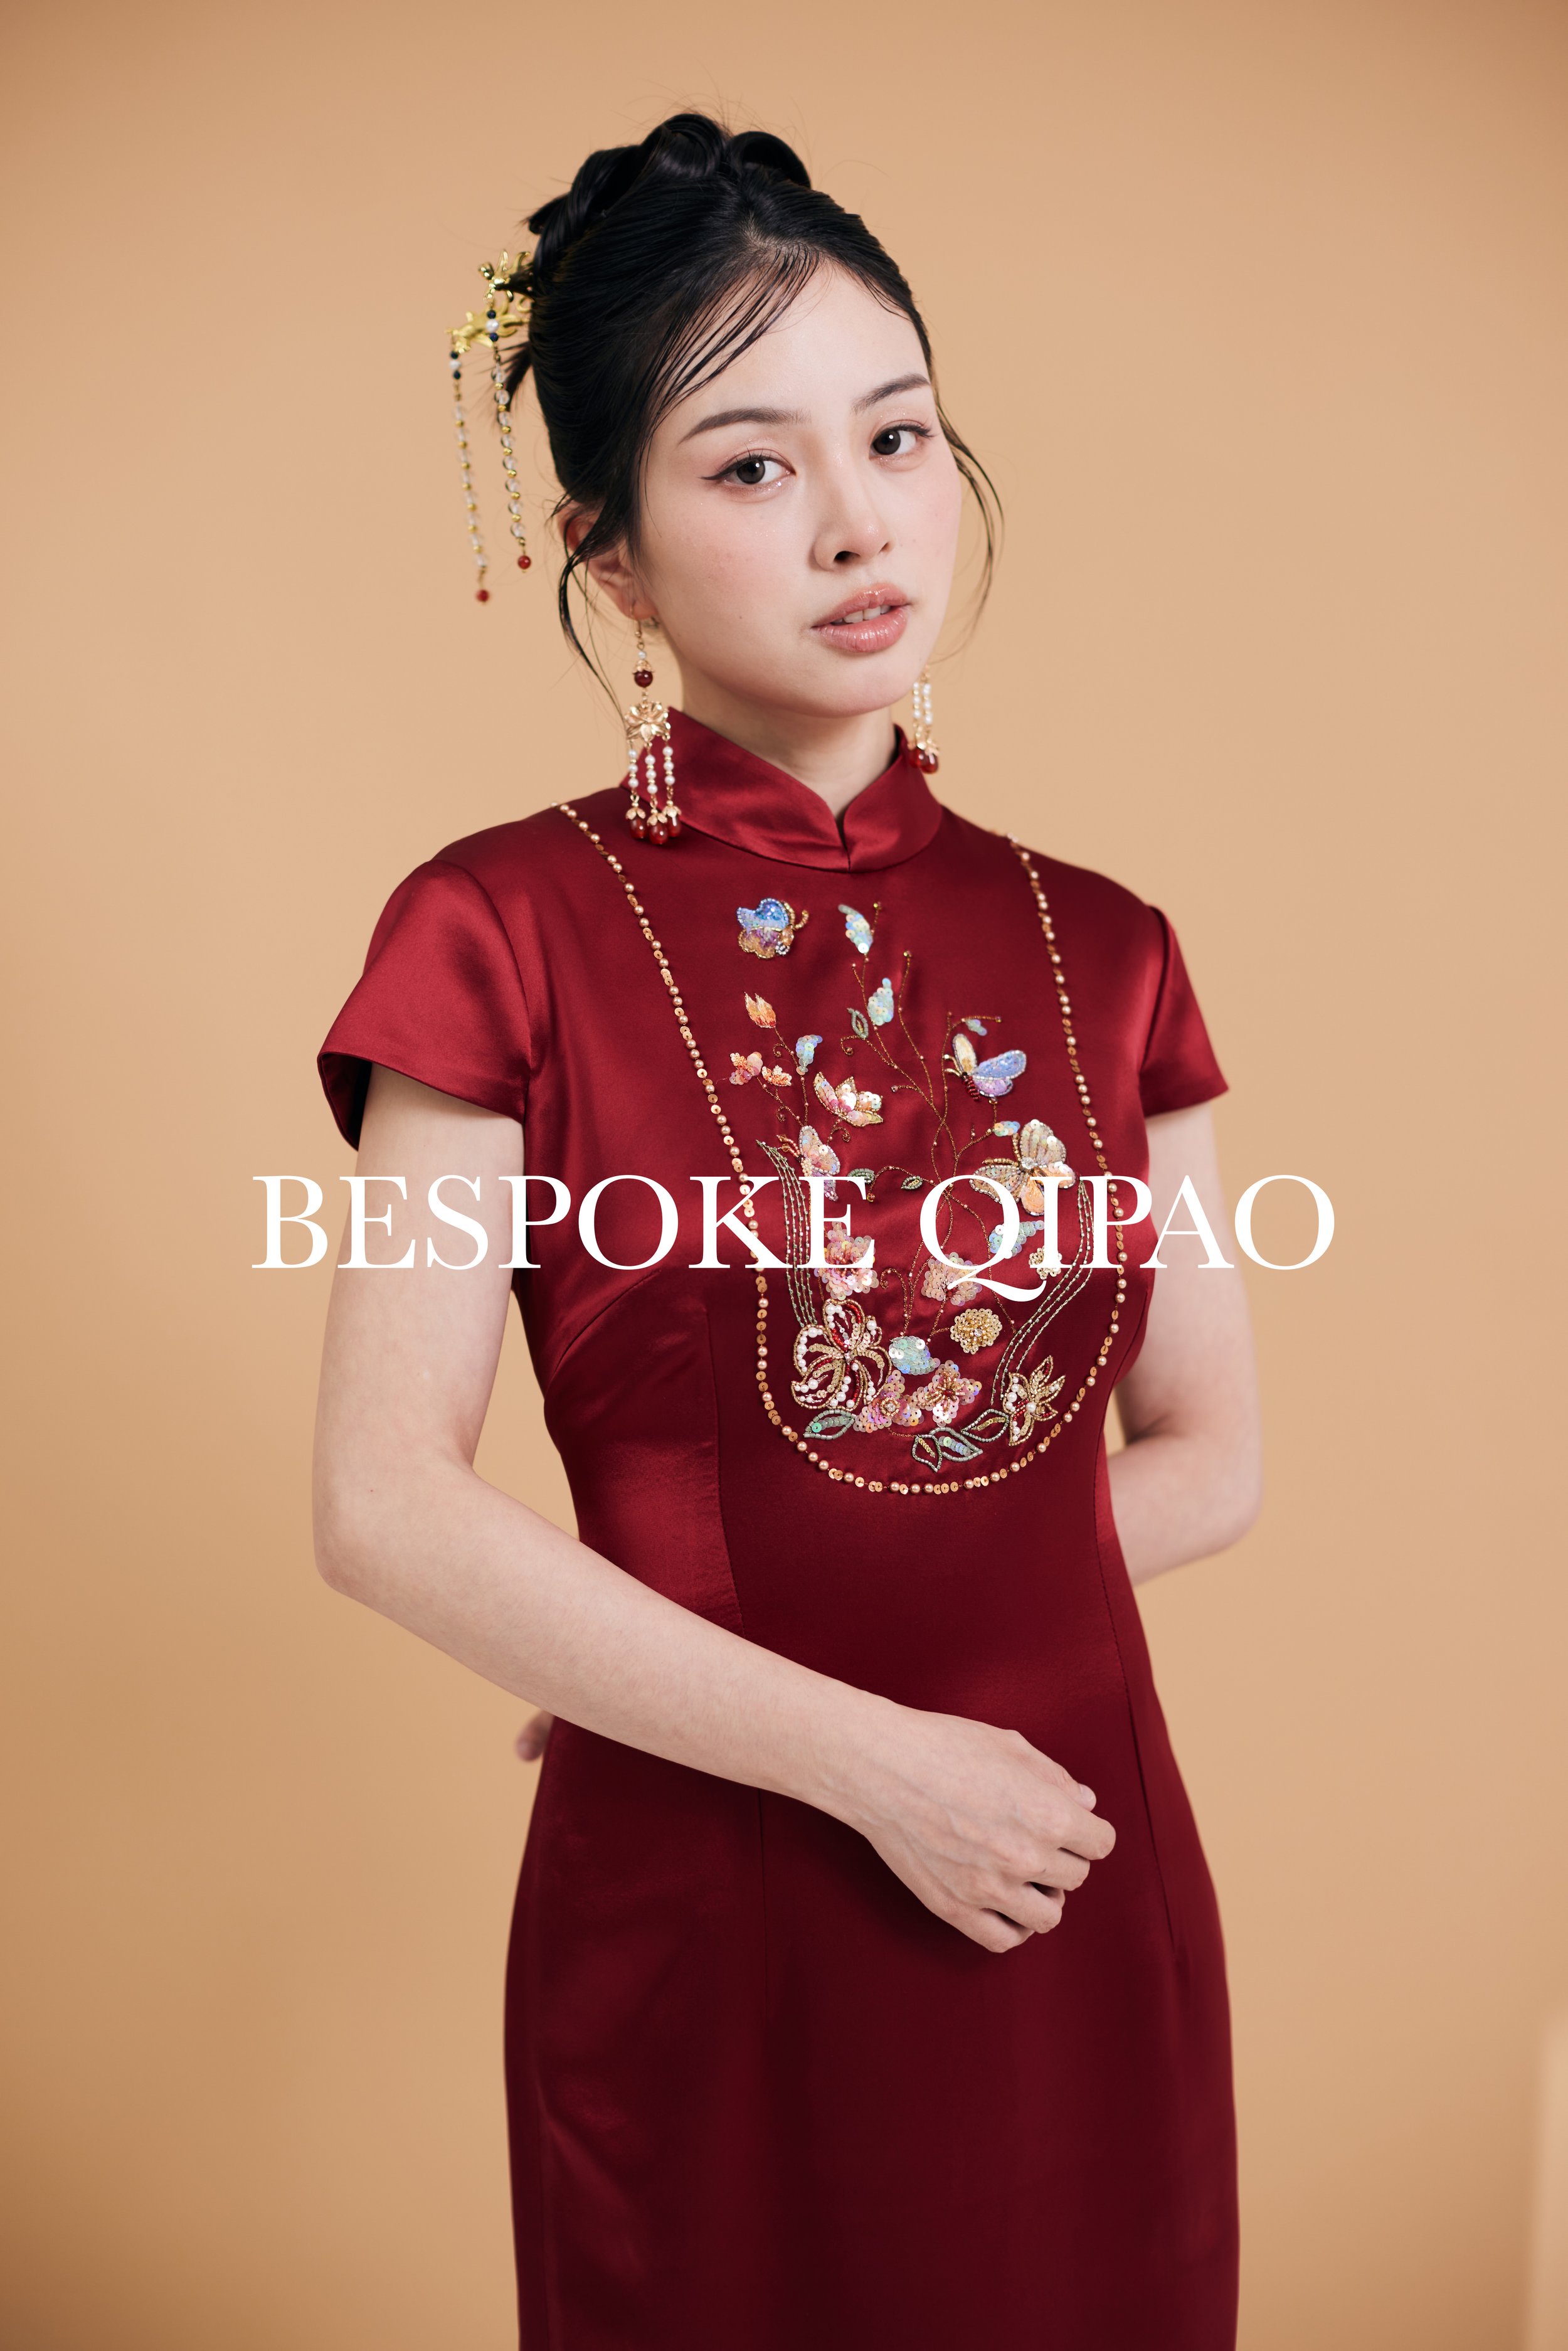 Bespoke QIPAO little silk woman Made Suits Singapore tailor made suits bespoke tailor singapore suits ESCORIAL Standeven Made Suits Commonsuits sucks.jpg